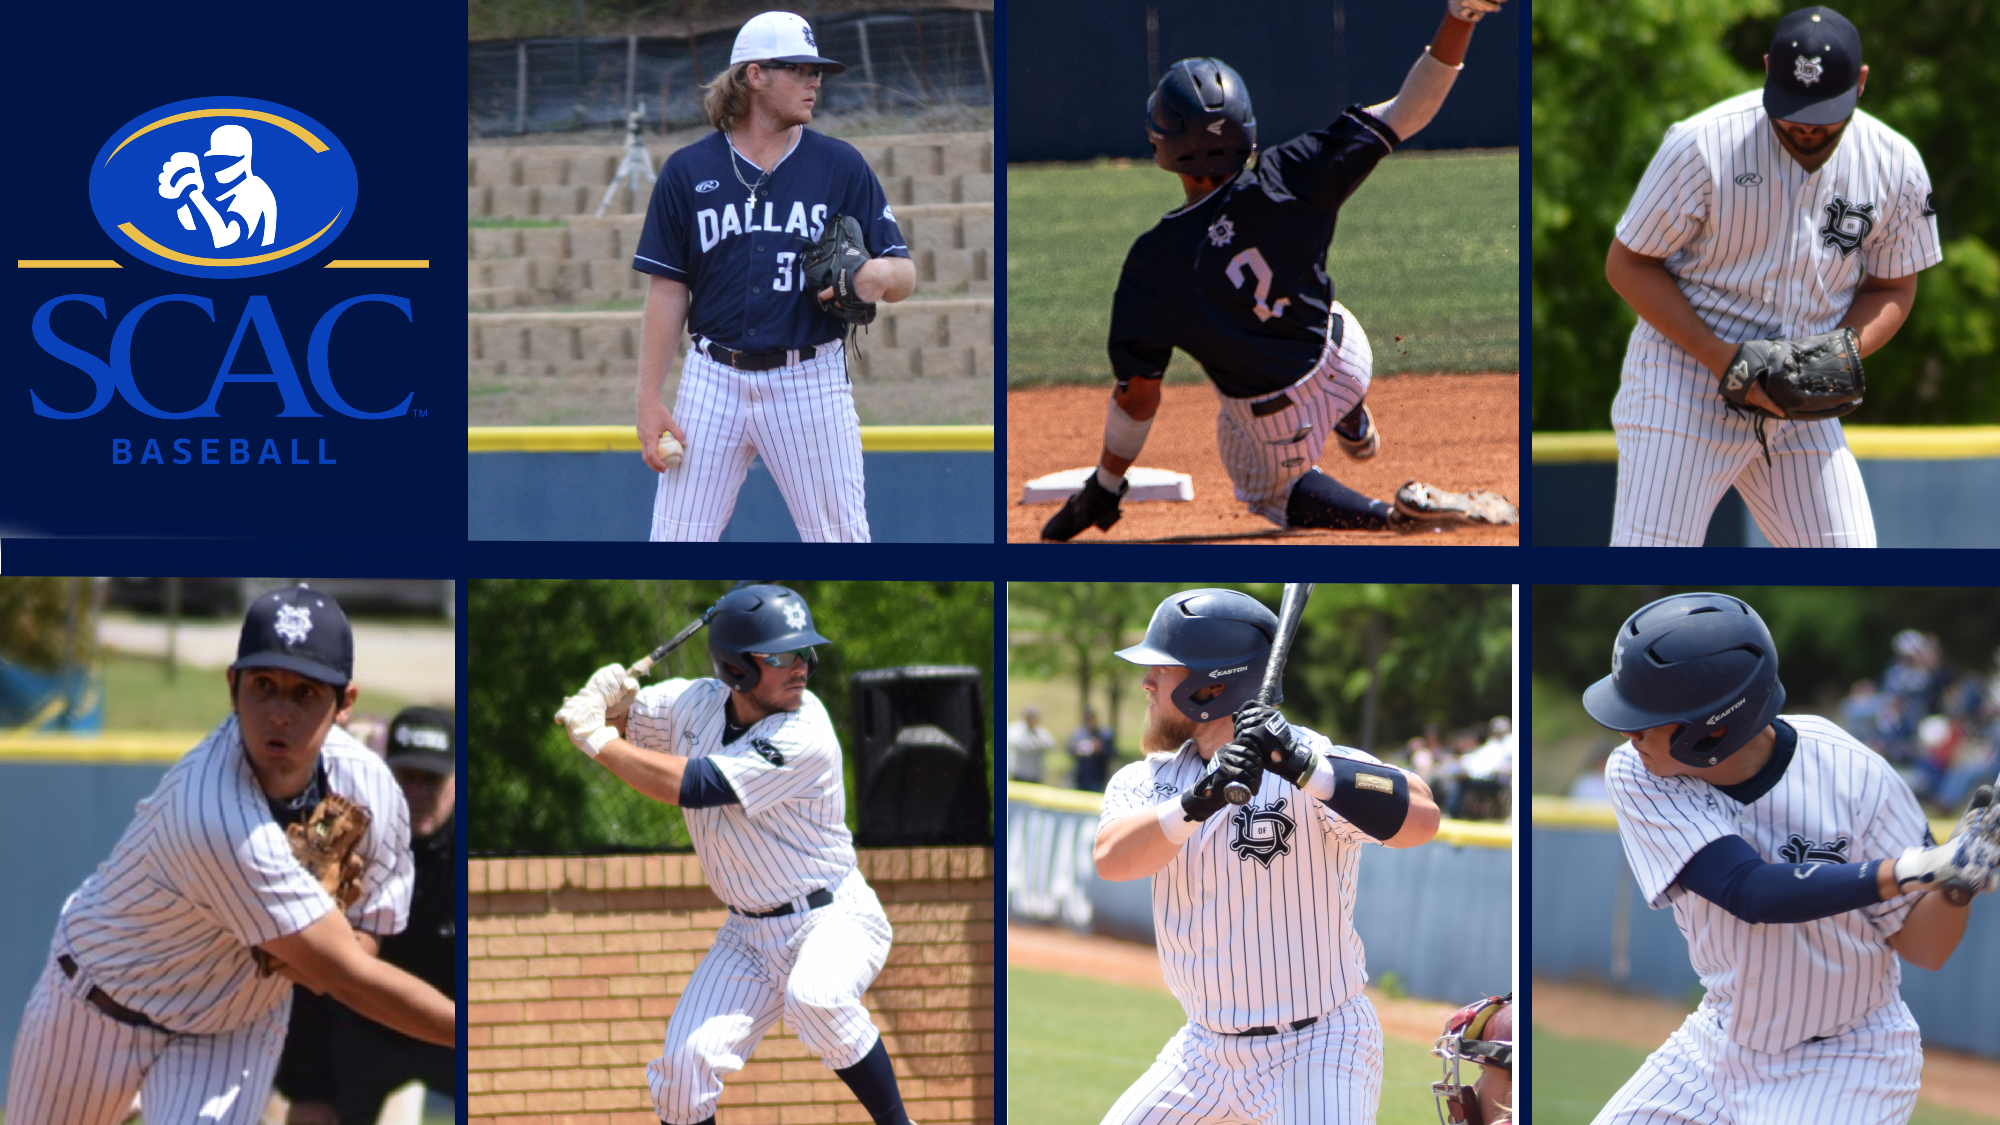 Seven Crusaders Earn SCAC Baseball All-Conference Honors